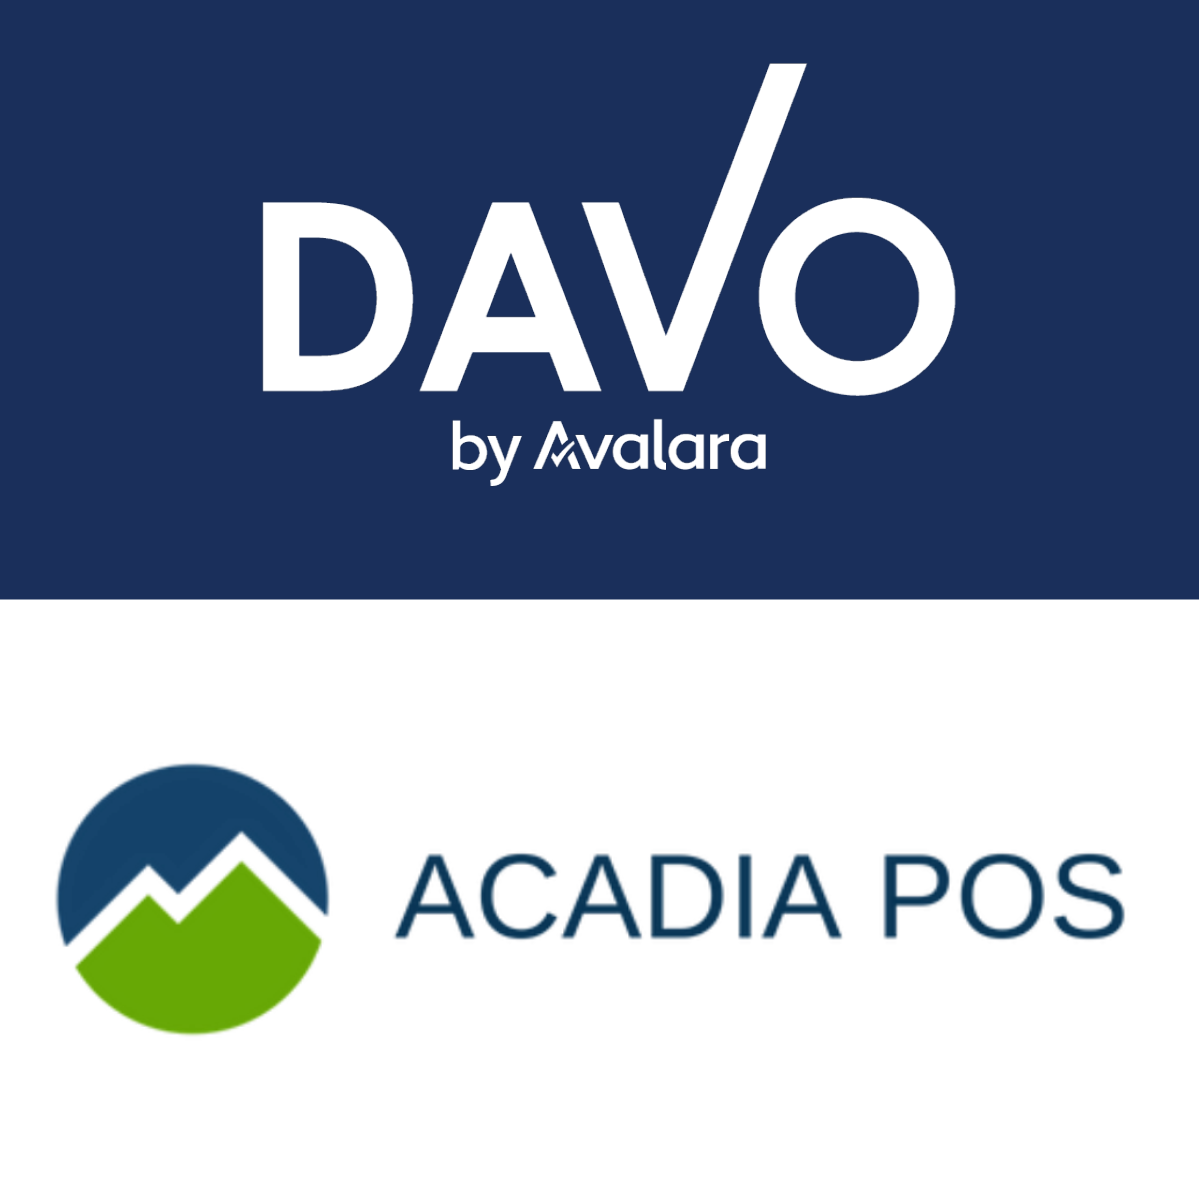 DAVO Sales Tax Partners with Acadia POS